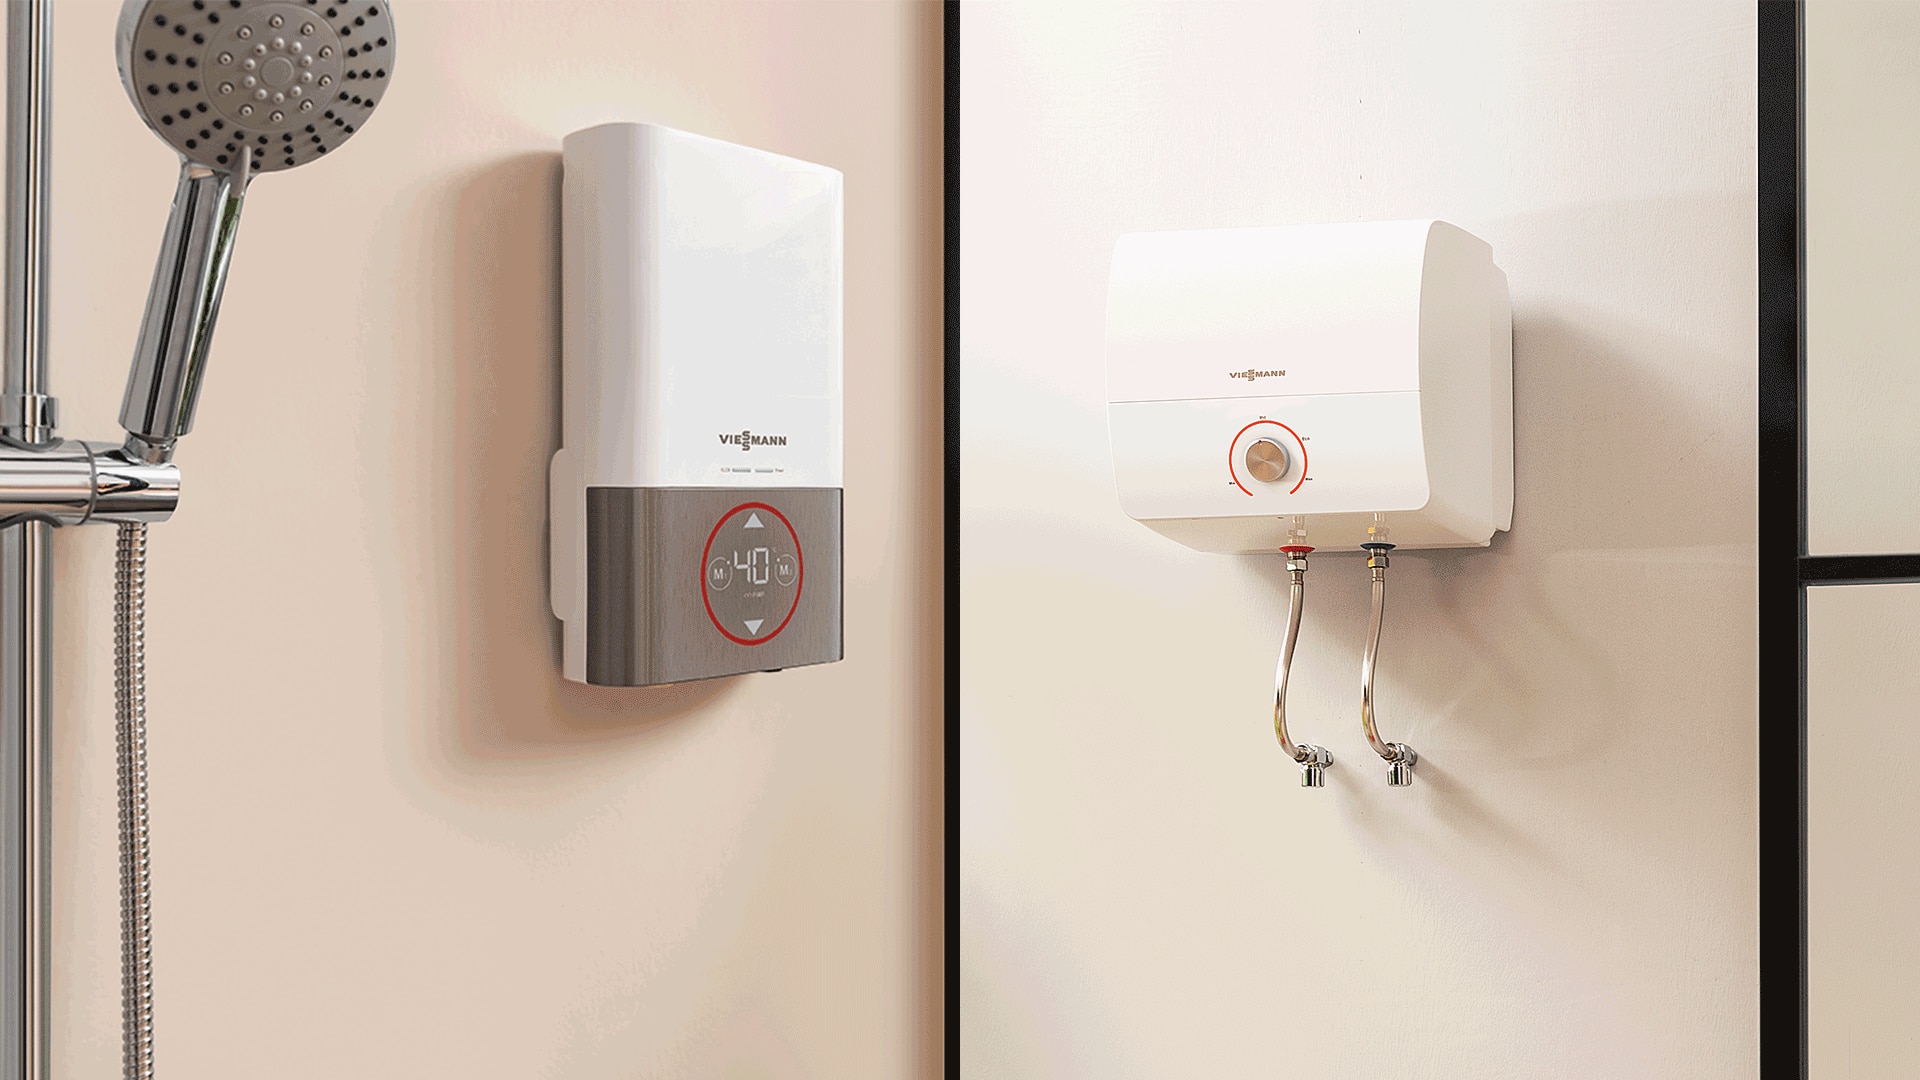 Vitowell Storage and instant water heaters